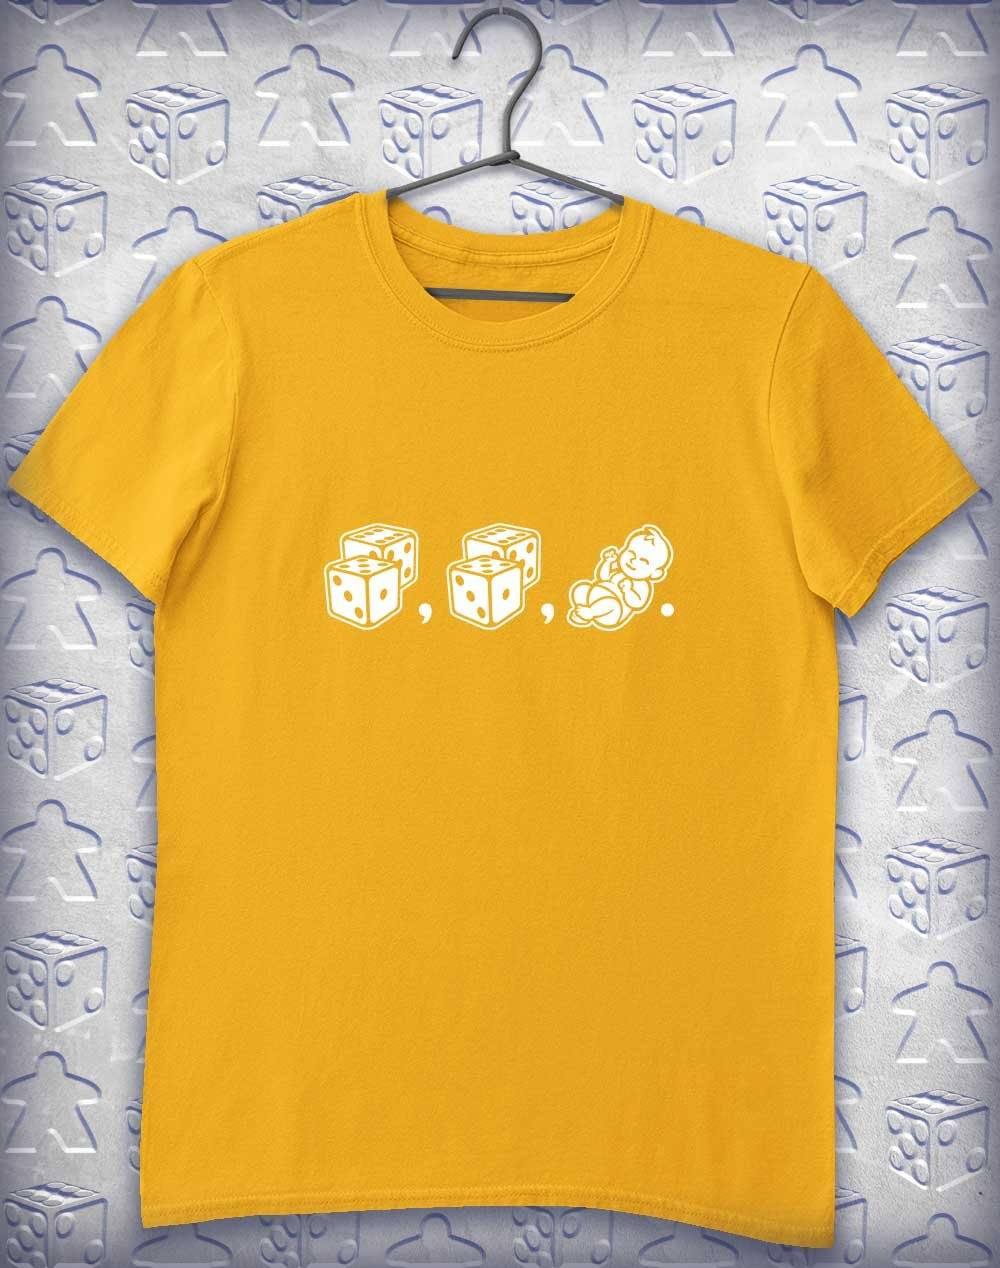 Dice Dice Baby (Plural) Alphagamer T-Shirt S / Gold  - Off World Tees